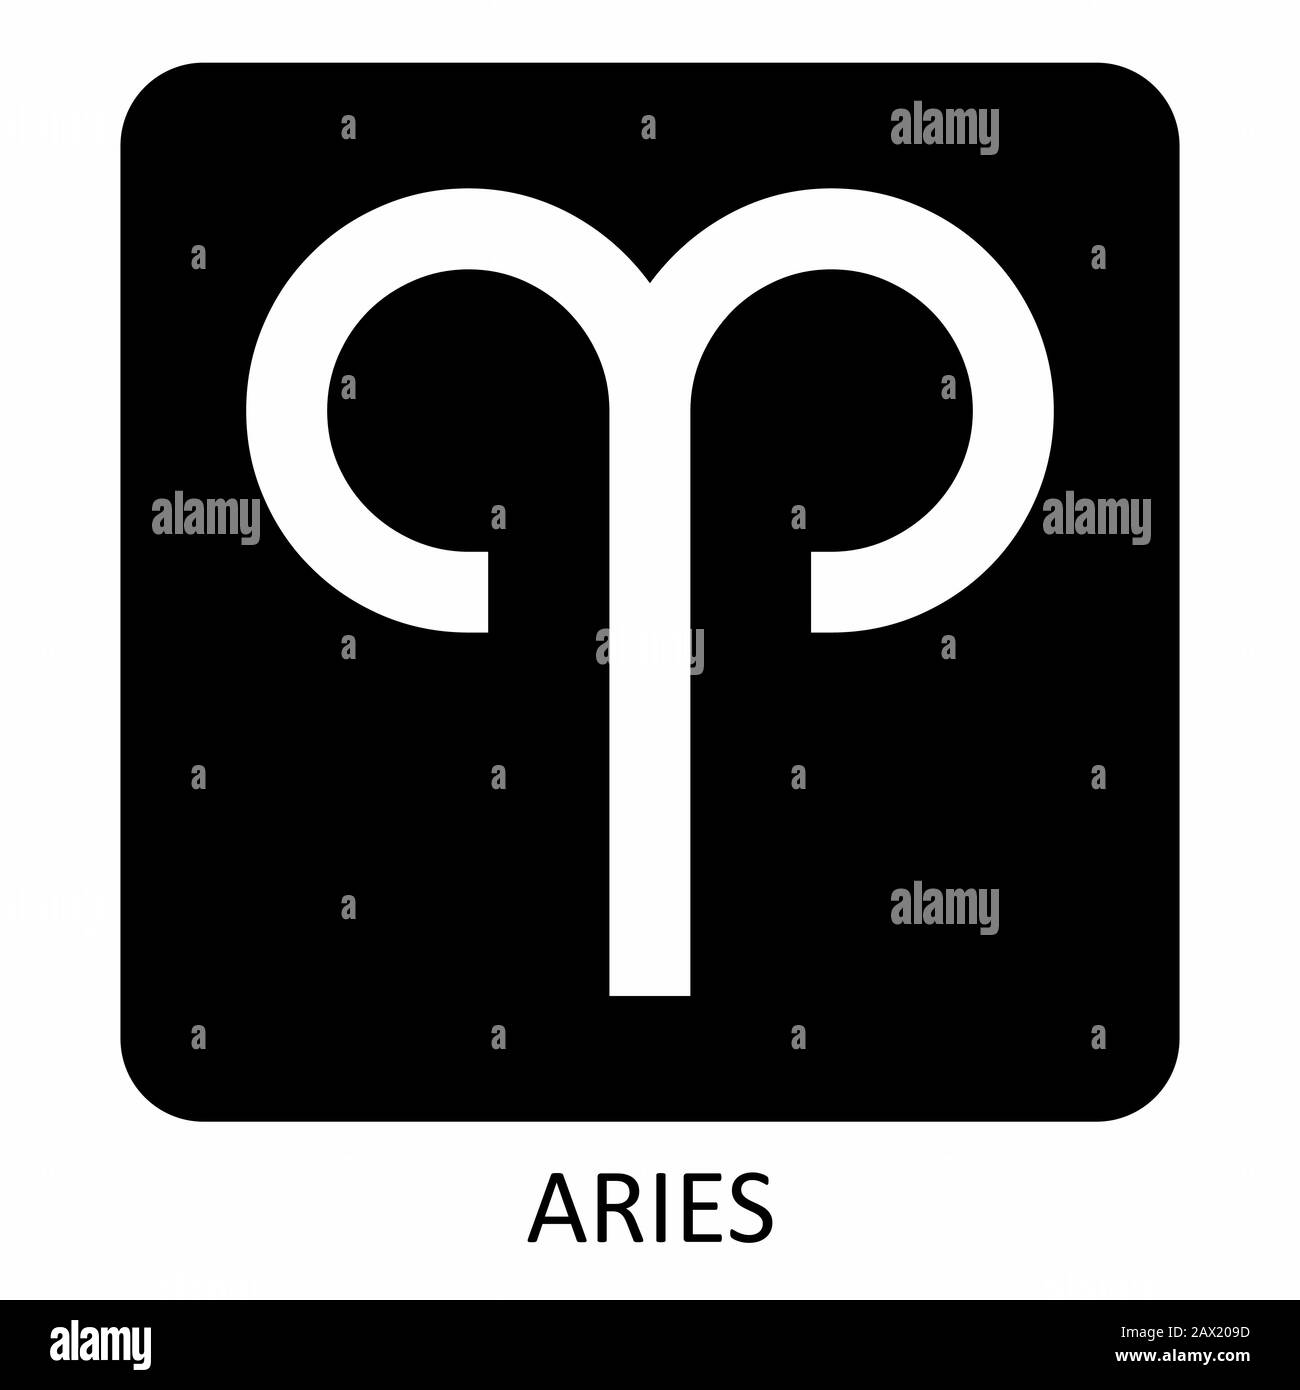 Aries Black and White Stock Photos & Images - Alamy